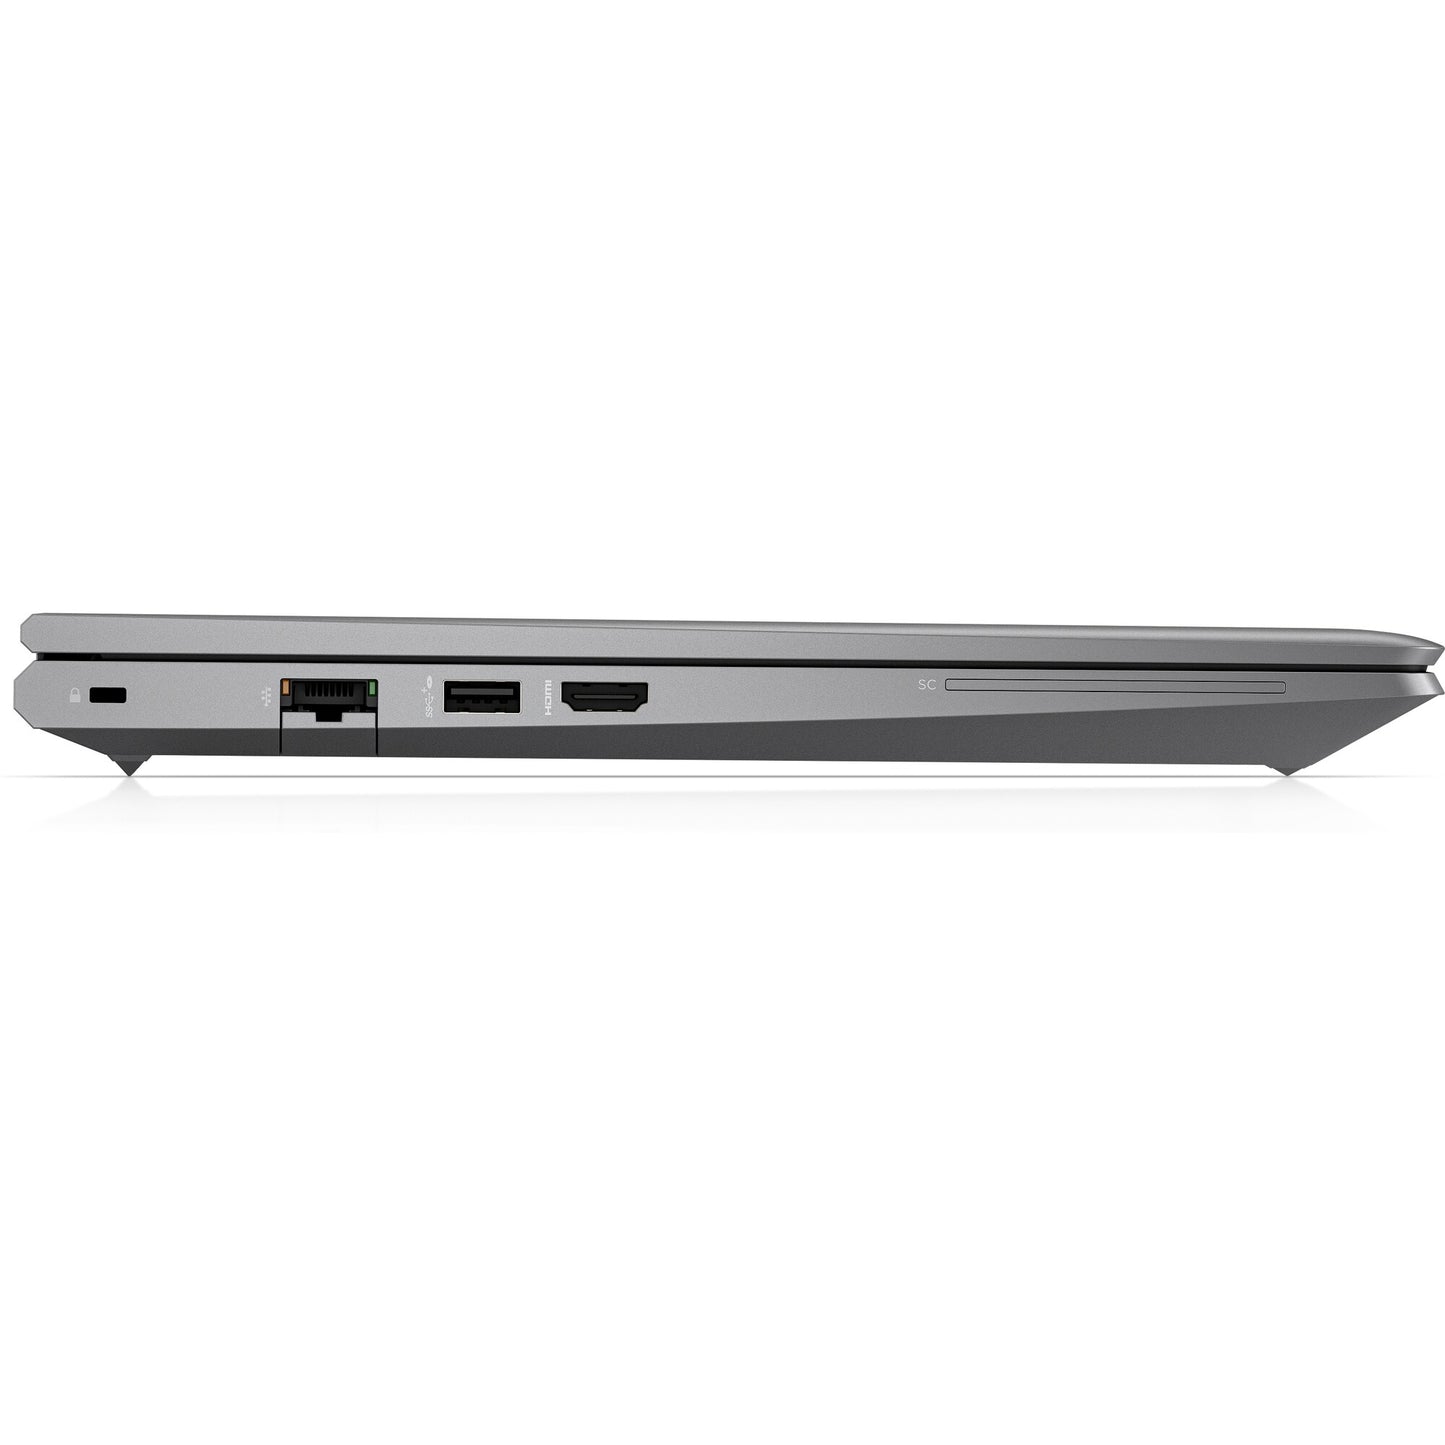 HP ZBook Power 15.6-inch G10 Mobile Workstation PC